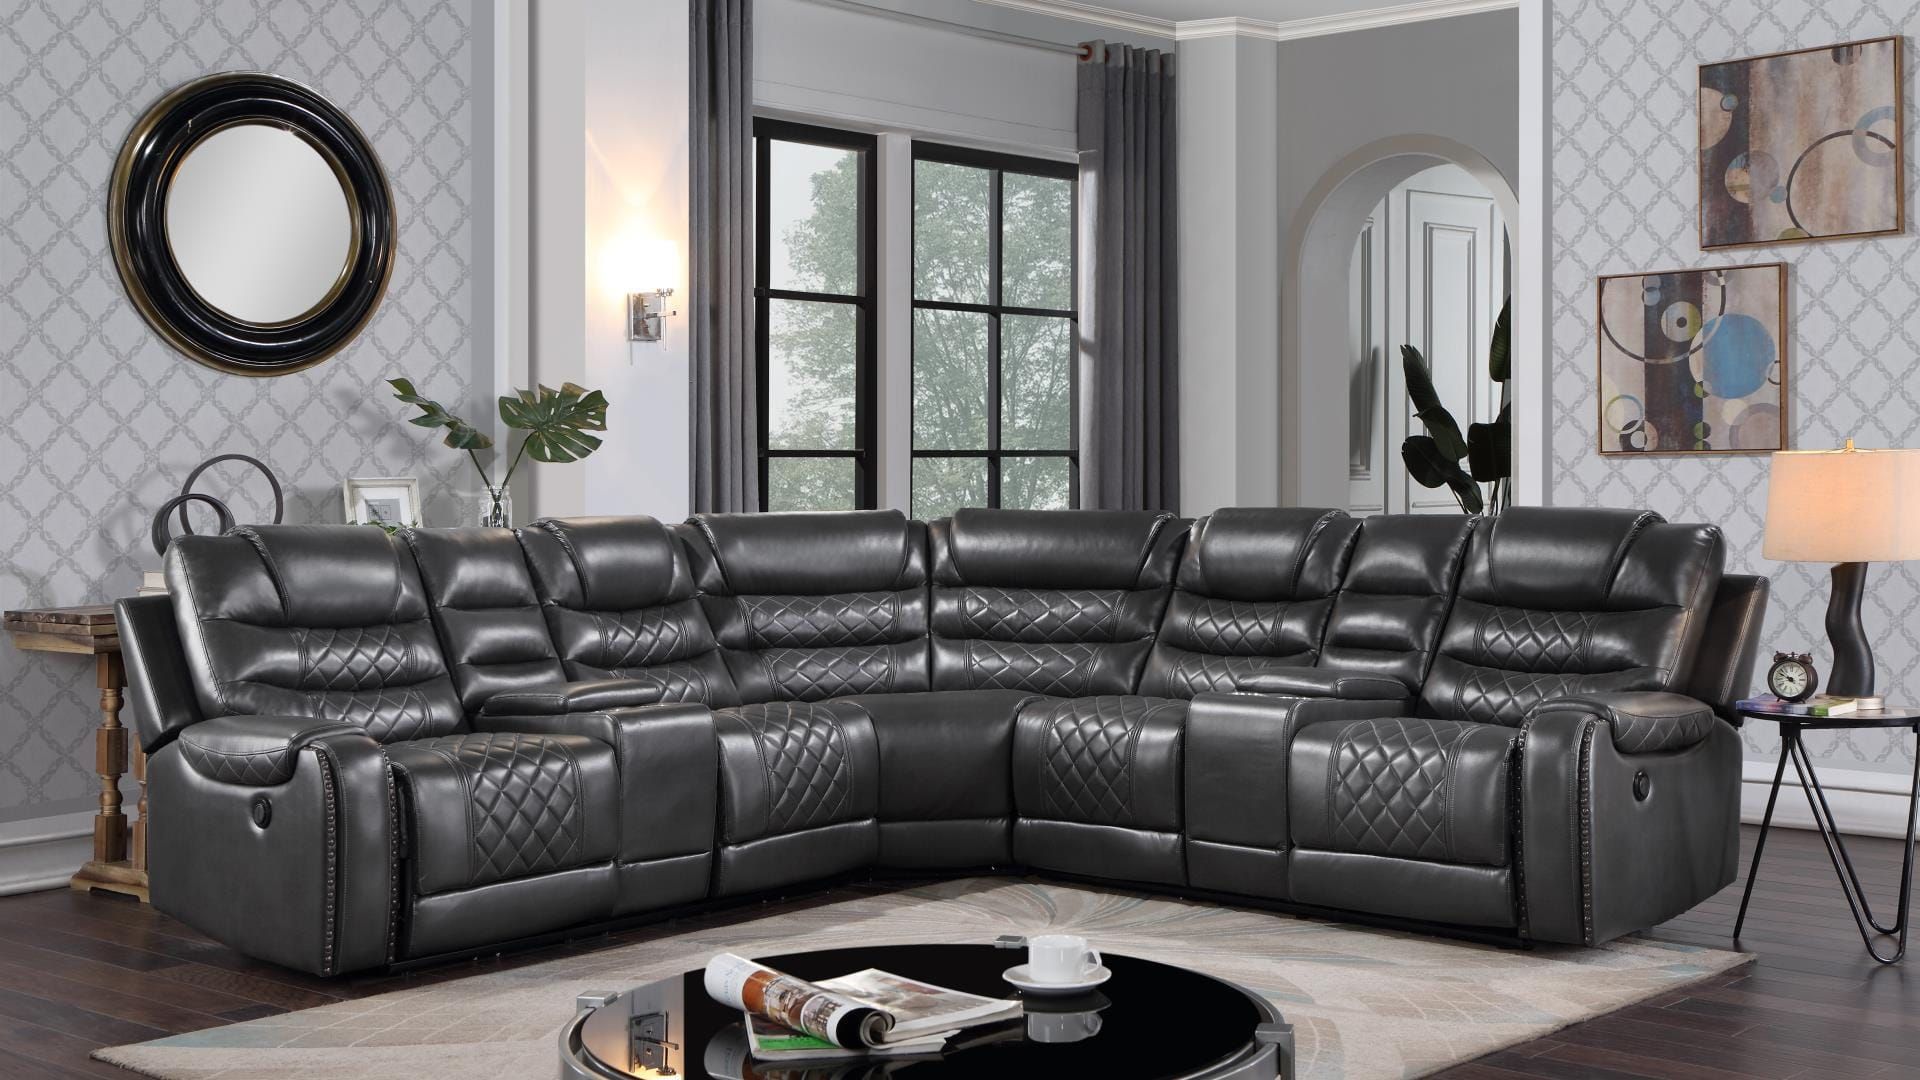 Tennesee Gray Faux Leather Sectional Sofagalaxy Furniture Pertaining To Faux Leather Sectional Sofa Sets (View 11 of 15)